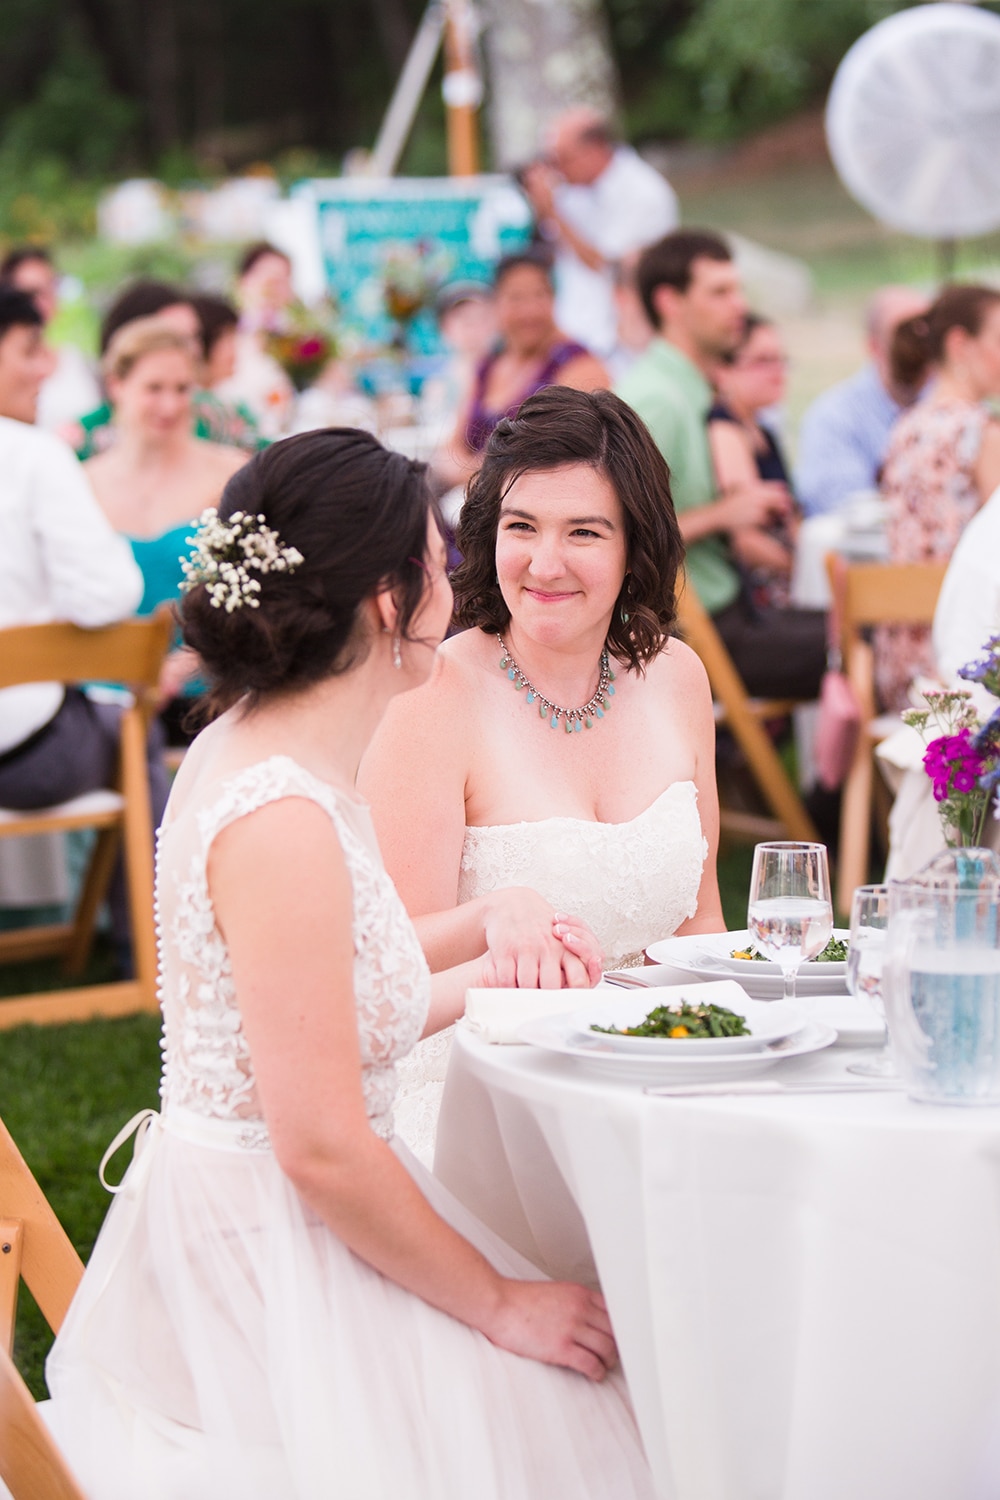 A documentary photograph of two brides looking at one another during the toasts at their Friendly Crossways Wedding